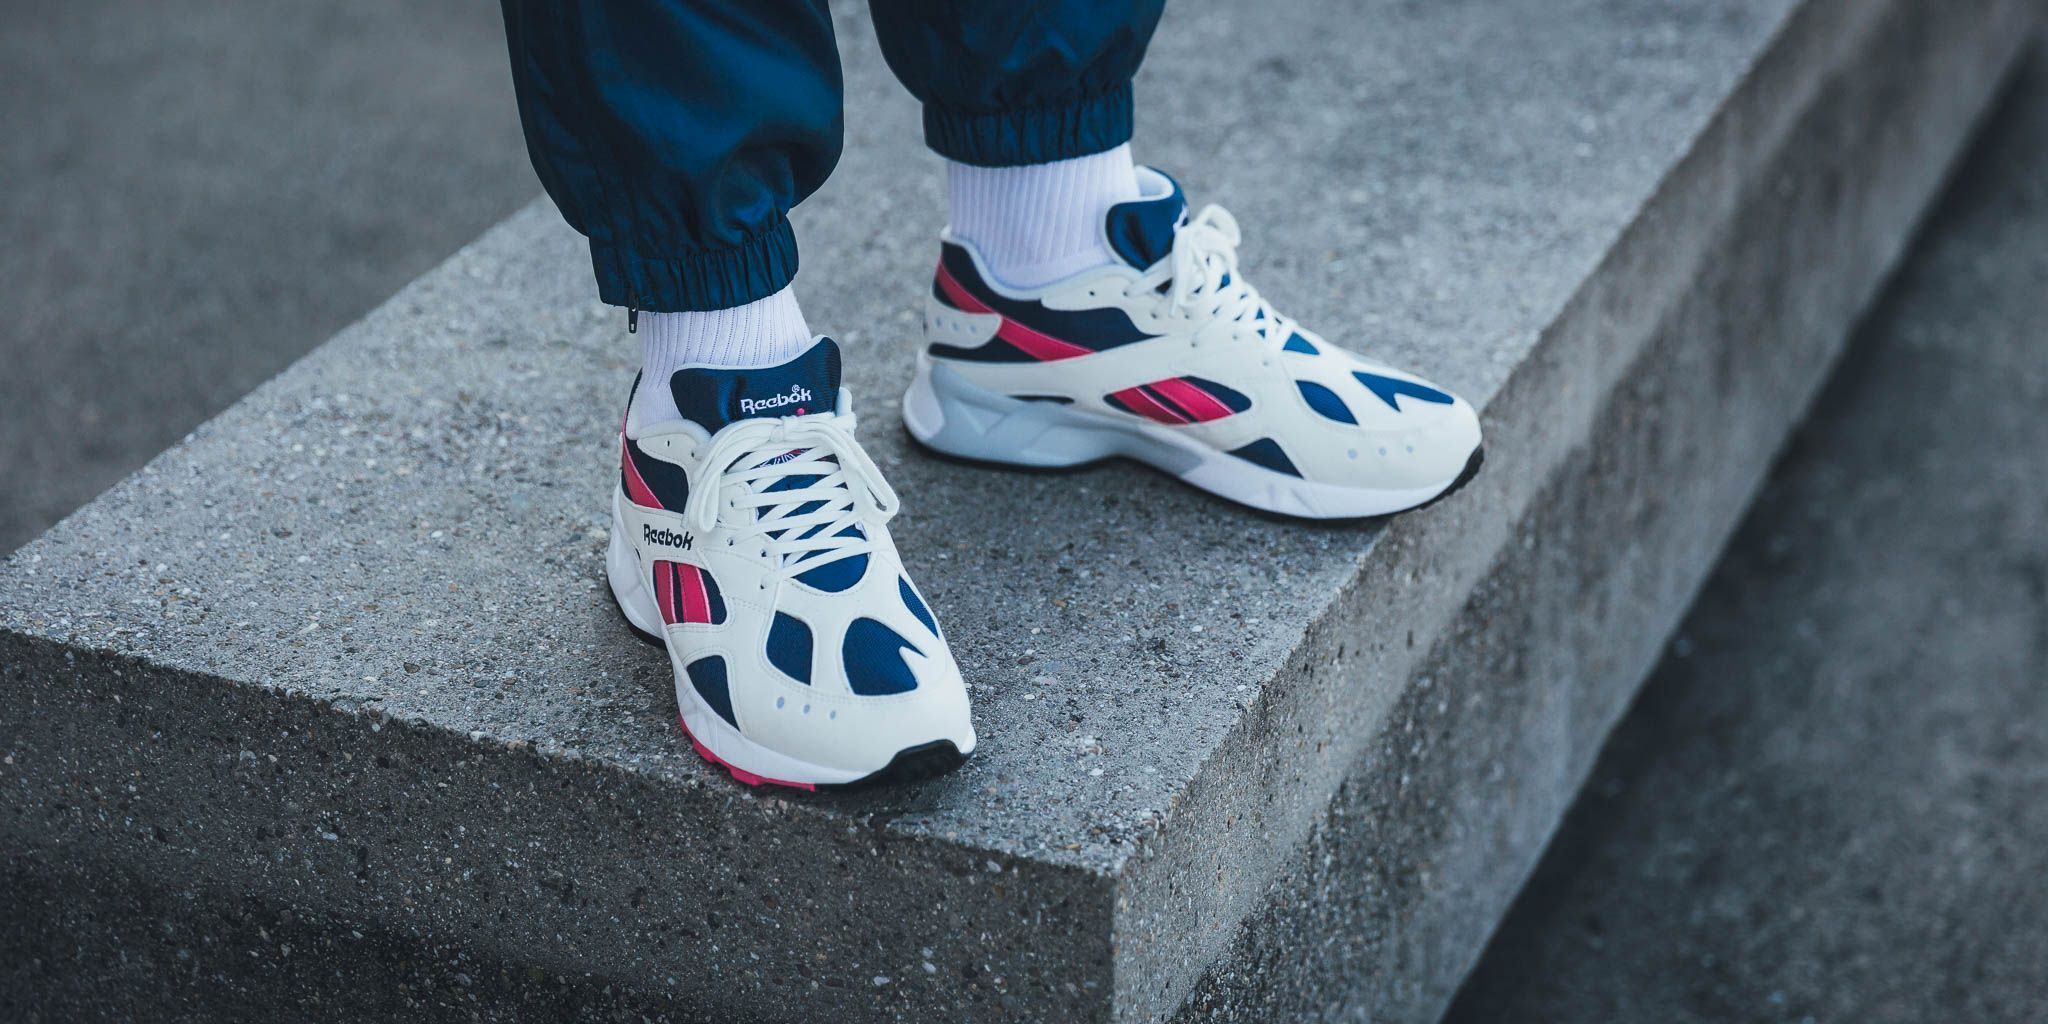 Titolo on Twitter: "Check this out 🍁 Reebok Aztrek - Chalk/Royal/Rose/White webSHOP 💥 https://t.co/7DSxuYZh6U #reebok #royal #rose #white #sale #sales #fallsale #midsale #sneakers #adidas #nike #newbalance #puma https://t.co ...